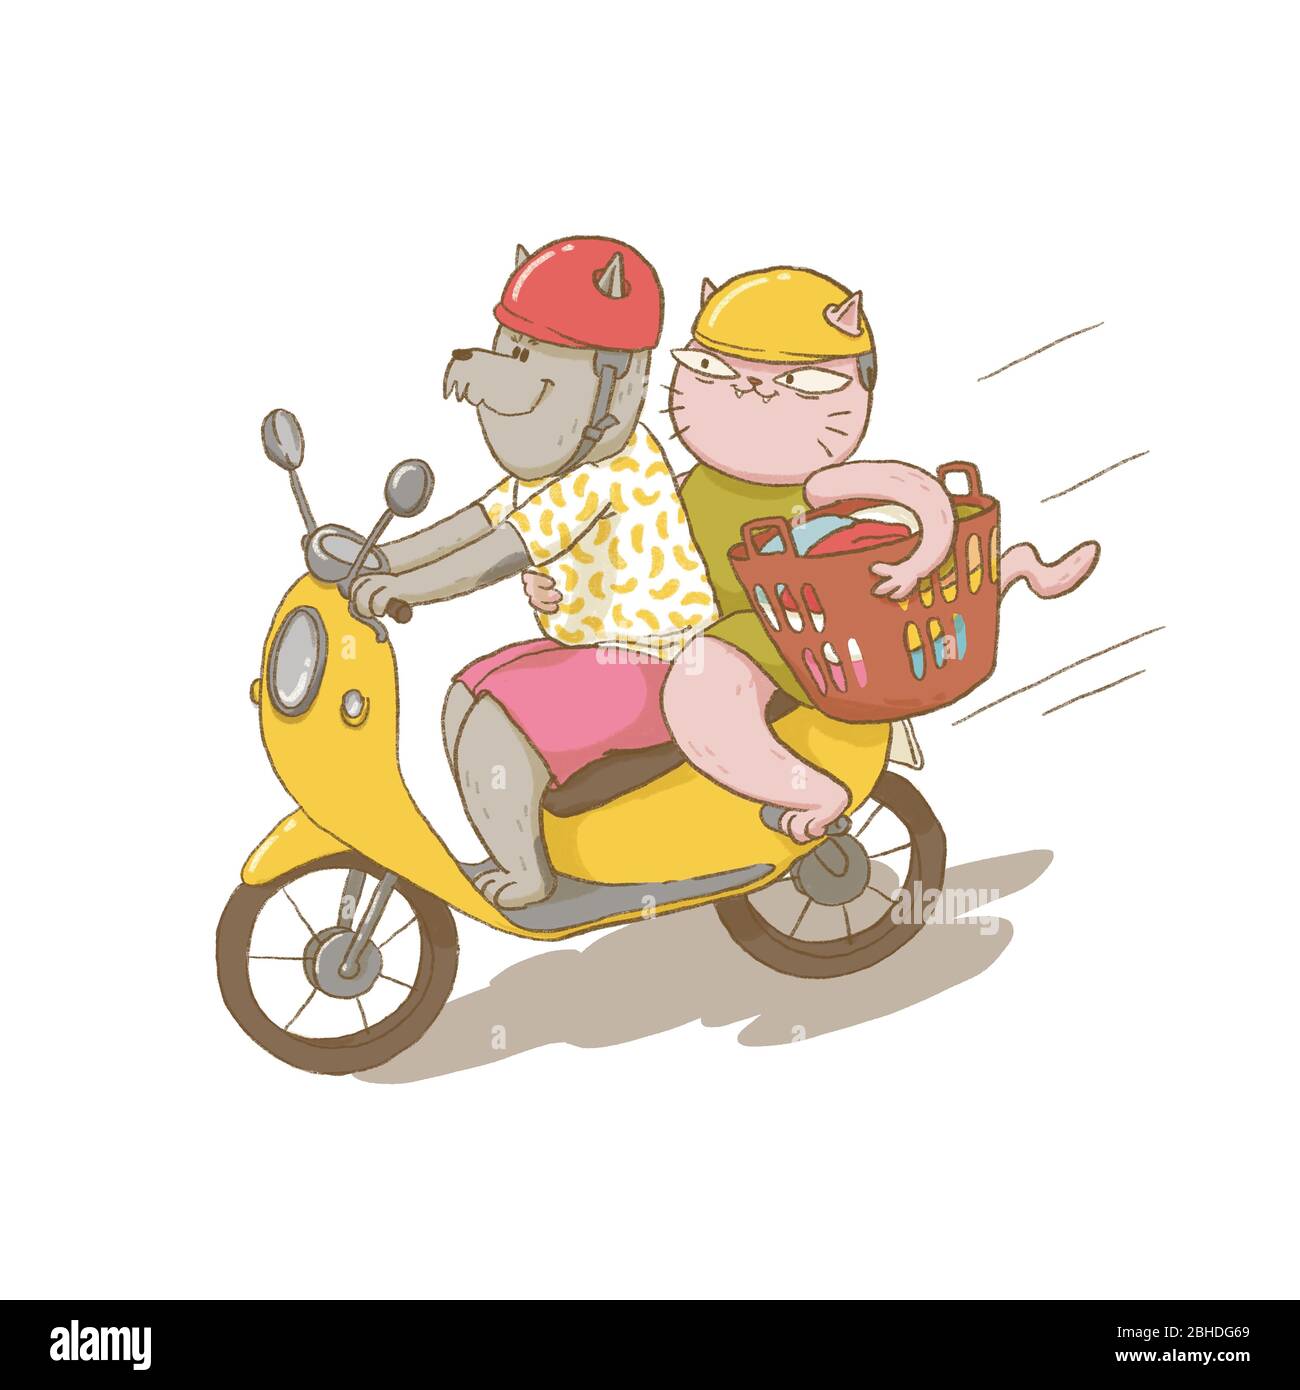 Two cartoon cats riding a bike with helmets and laundry basket. Stock Photo